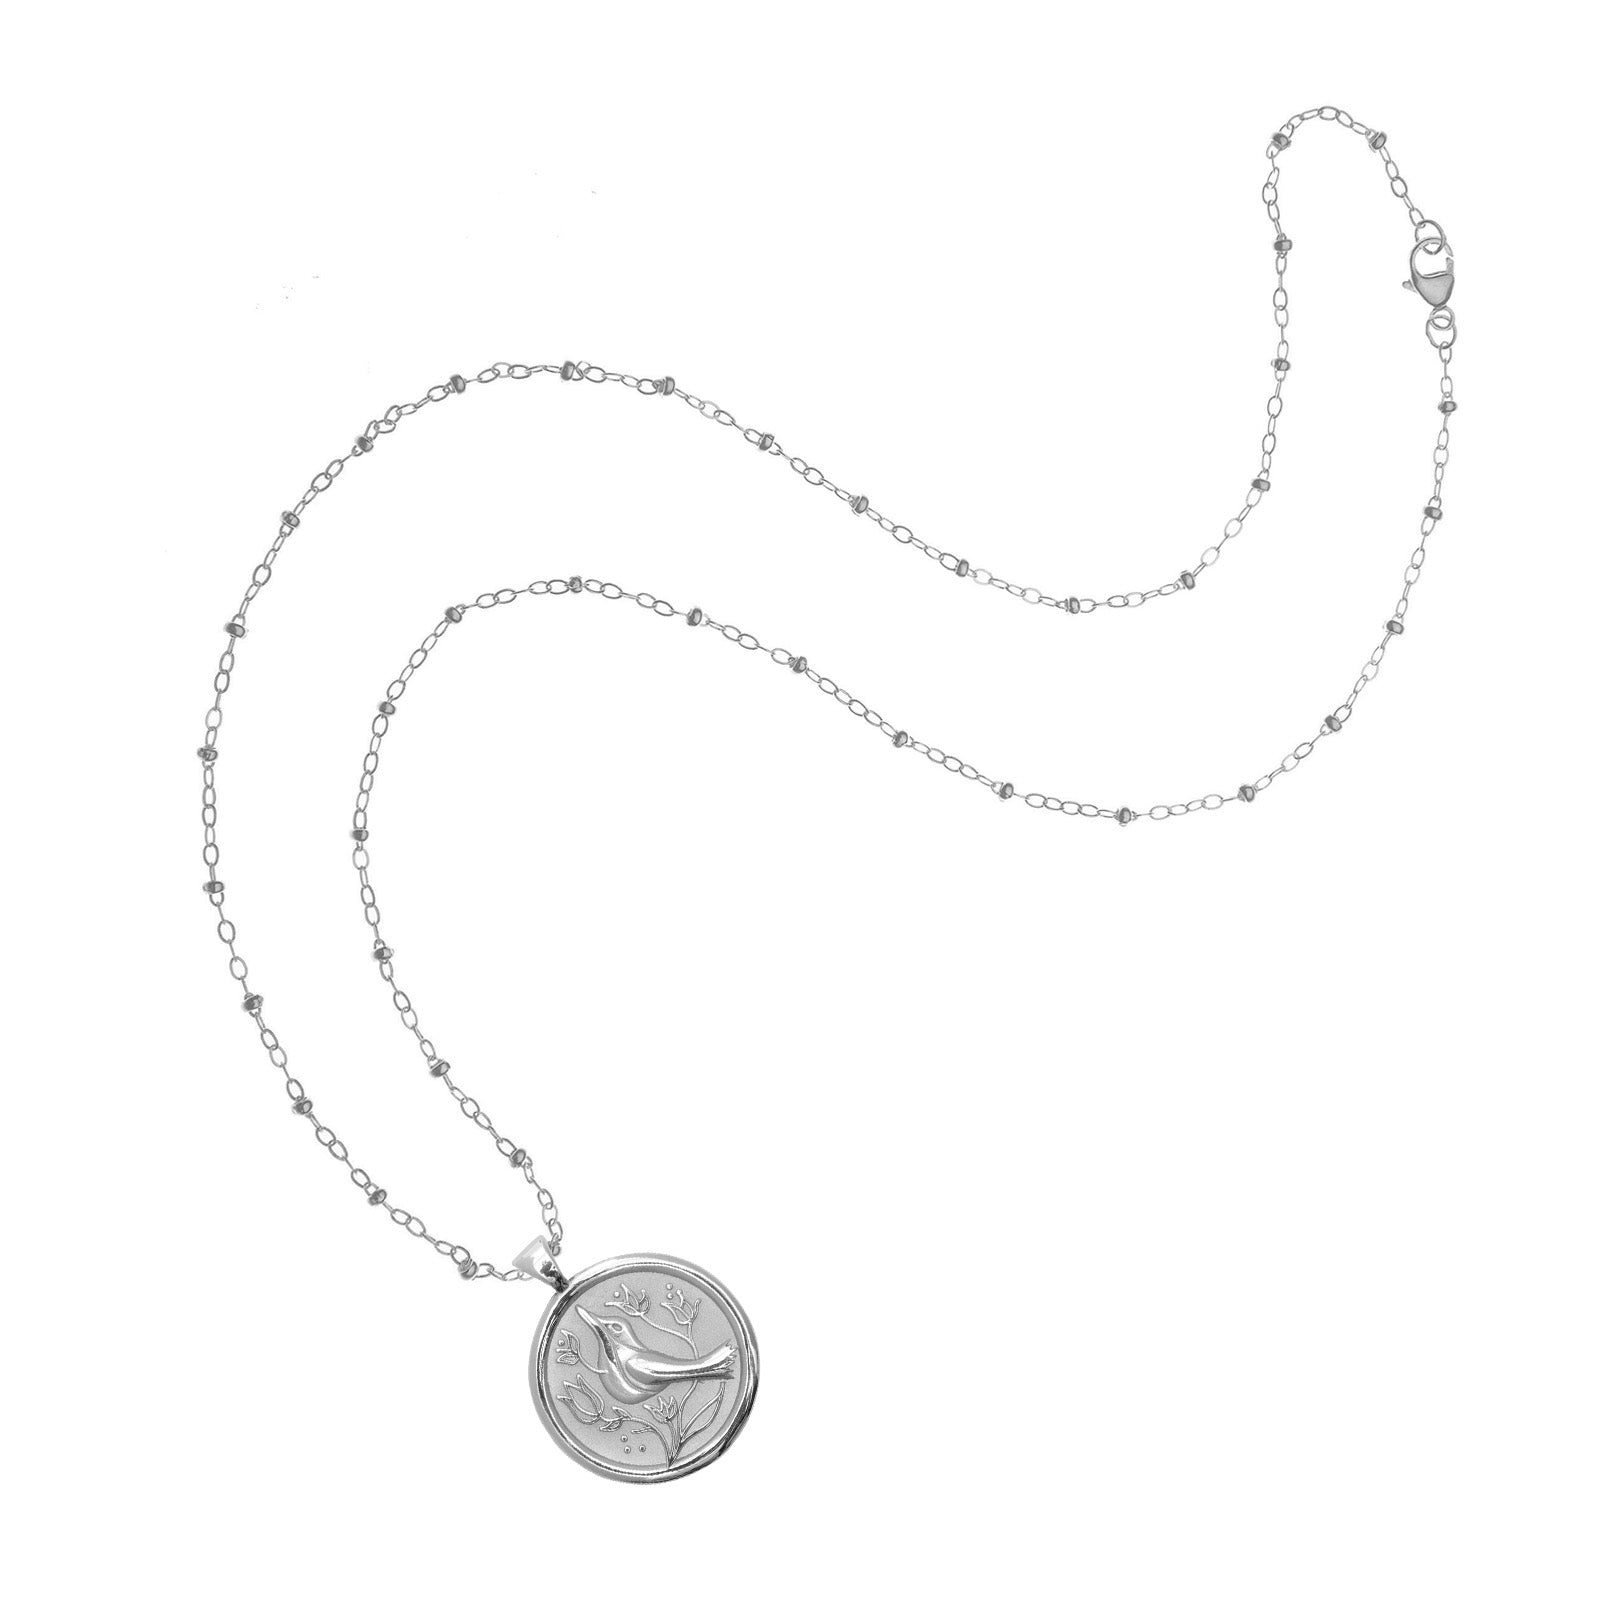 PEACE JW Small Pendant Coin in Silver